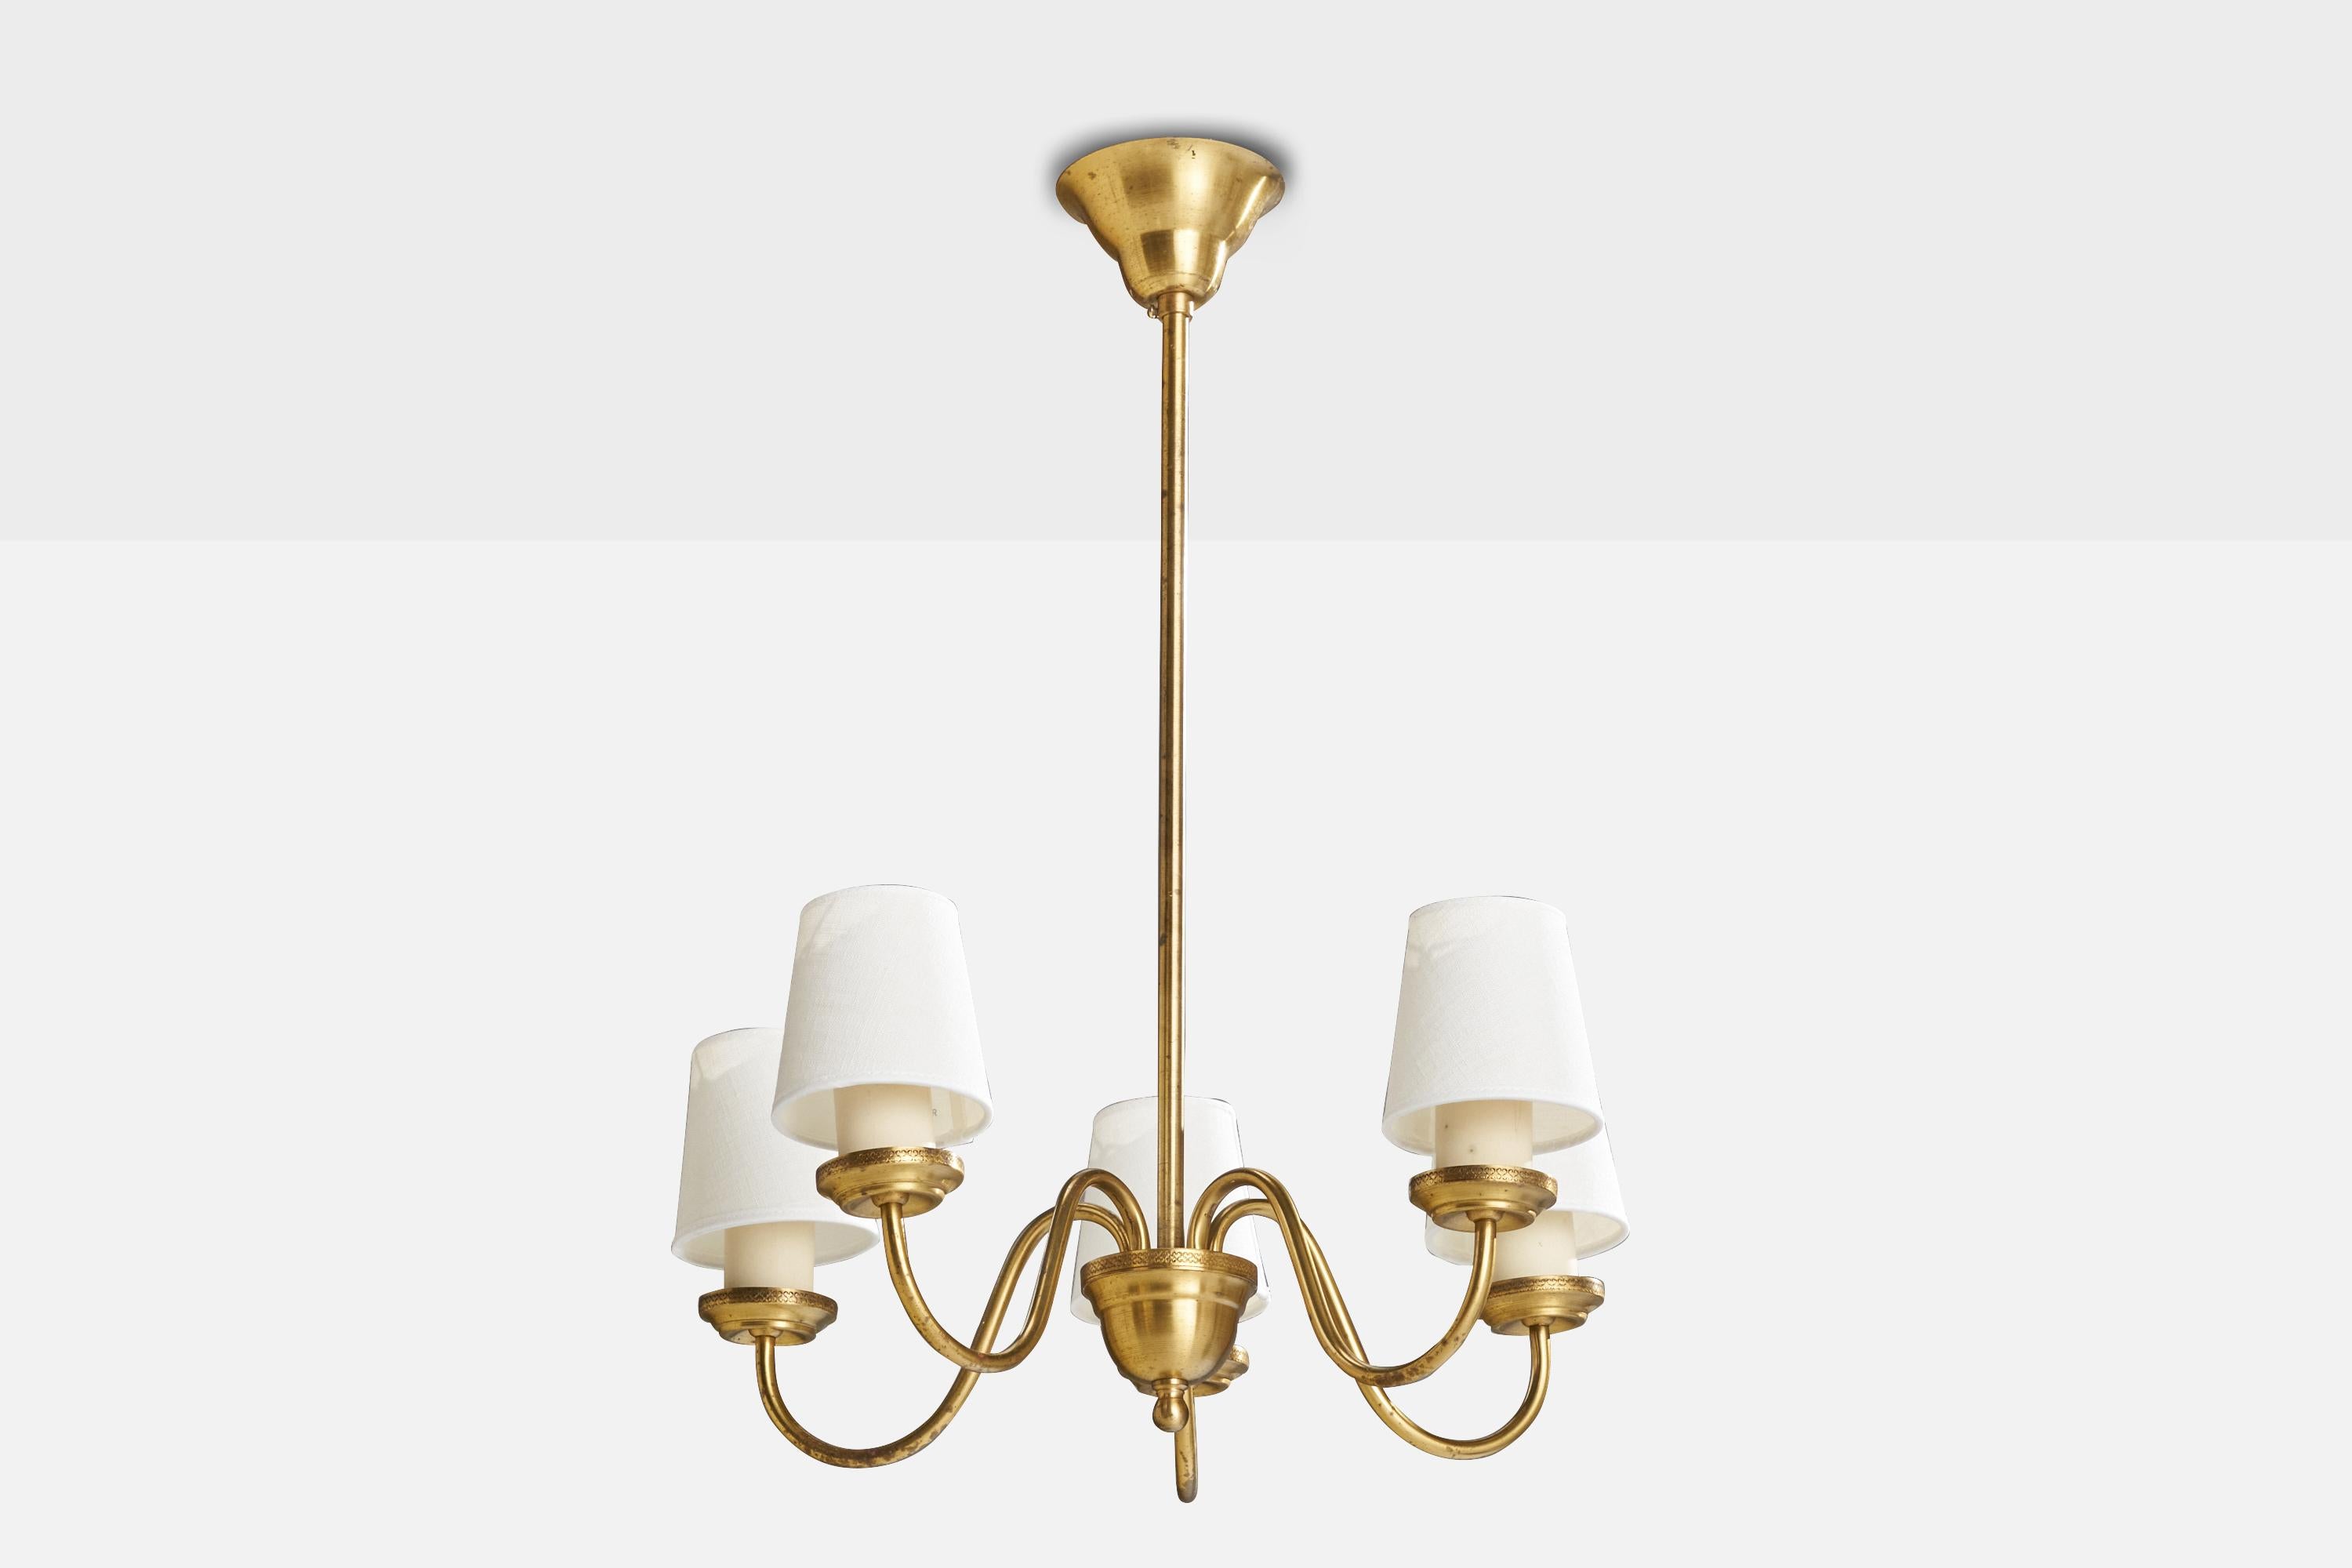 A brass, bakelite and white fabric chandelier designed and produced by Edvard Hagman, Sweden, c. 1940s.

Dimensions of canopy (inches): 2.5” H x 4.5” Diameter
Socket takes standard E-26 bulbs. 5 sockets.There is no maximum wattage stated on the